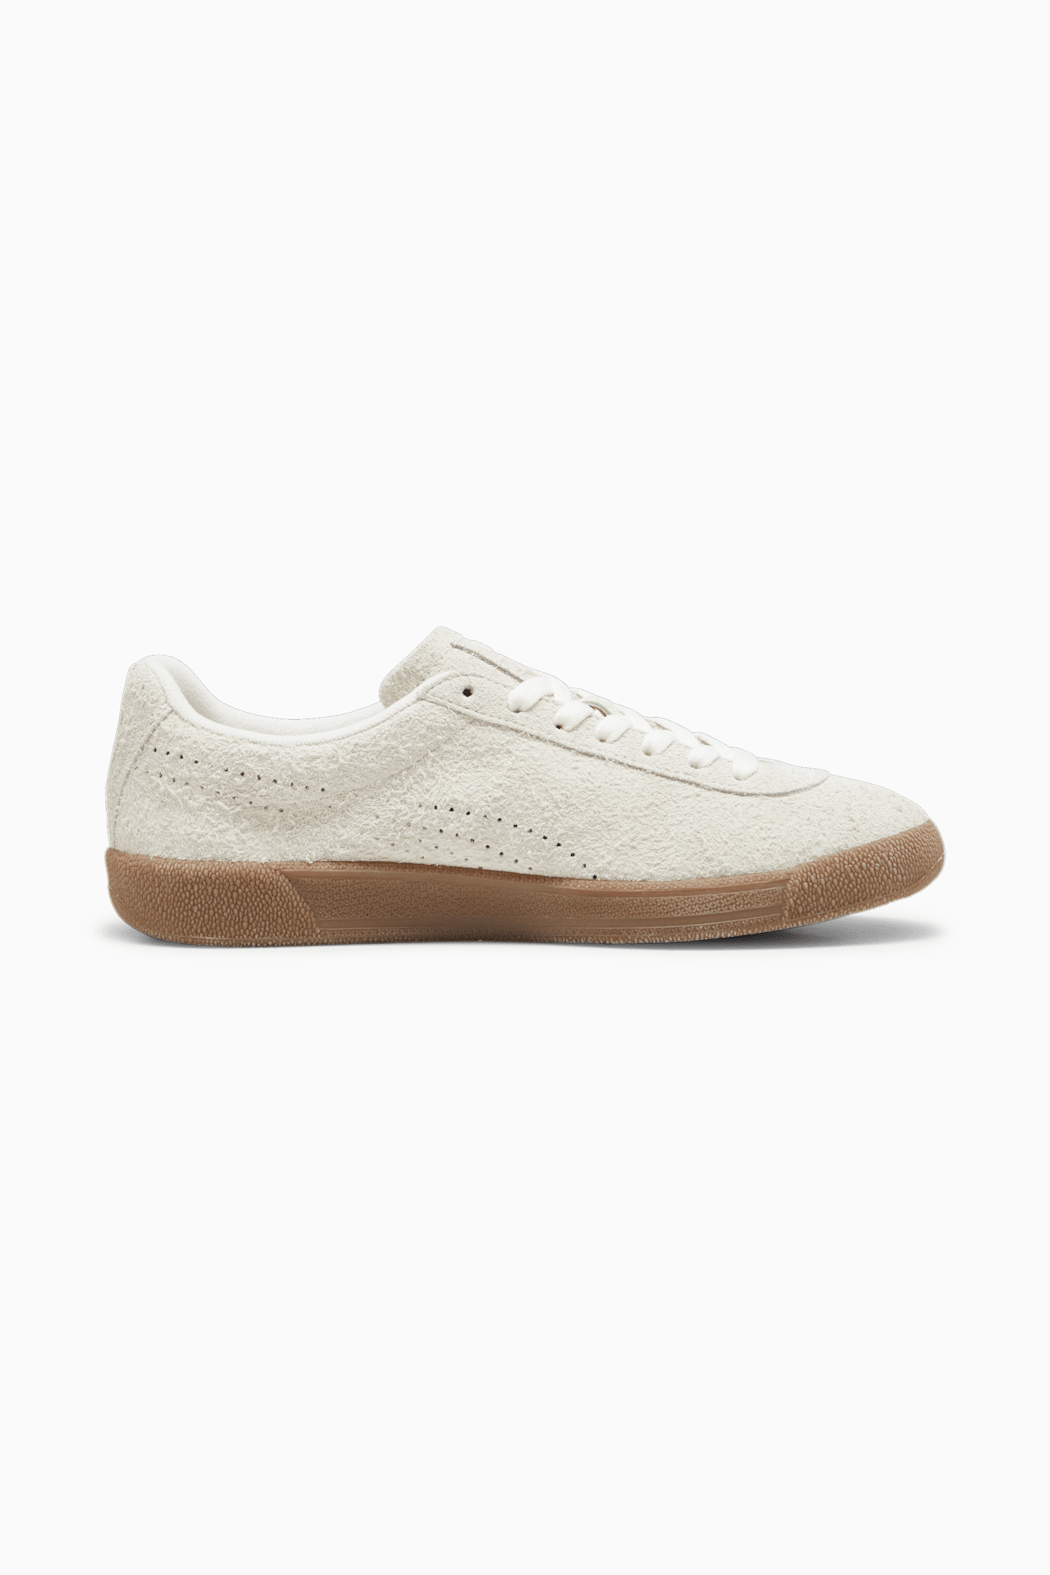 Puma Star SD Frosted Ivory Gum